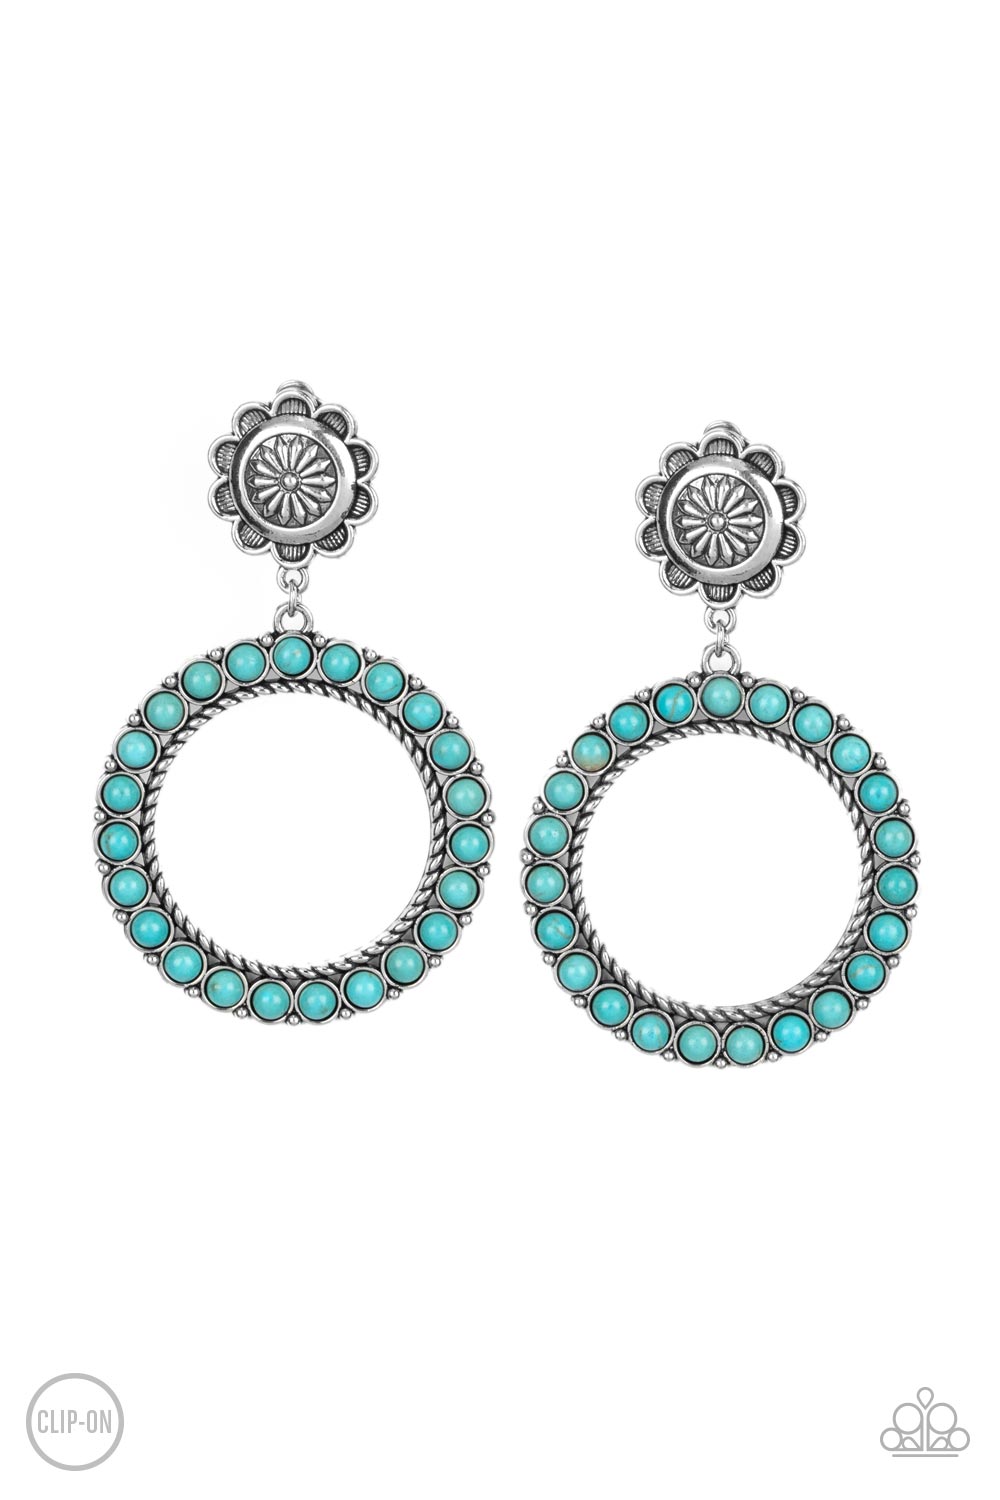 Playfully Prairie - Blue Item #P5CO-BLXX-056XX Featuring studded and twisted rope-like silver accents, a turquoise stone dotted hoop swings from the bottom of a rustic silver flower for a whimsically floral fashion. Earring attaches to a standard clip-on fitting.  Sold as one pair of clip-on earrings.